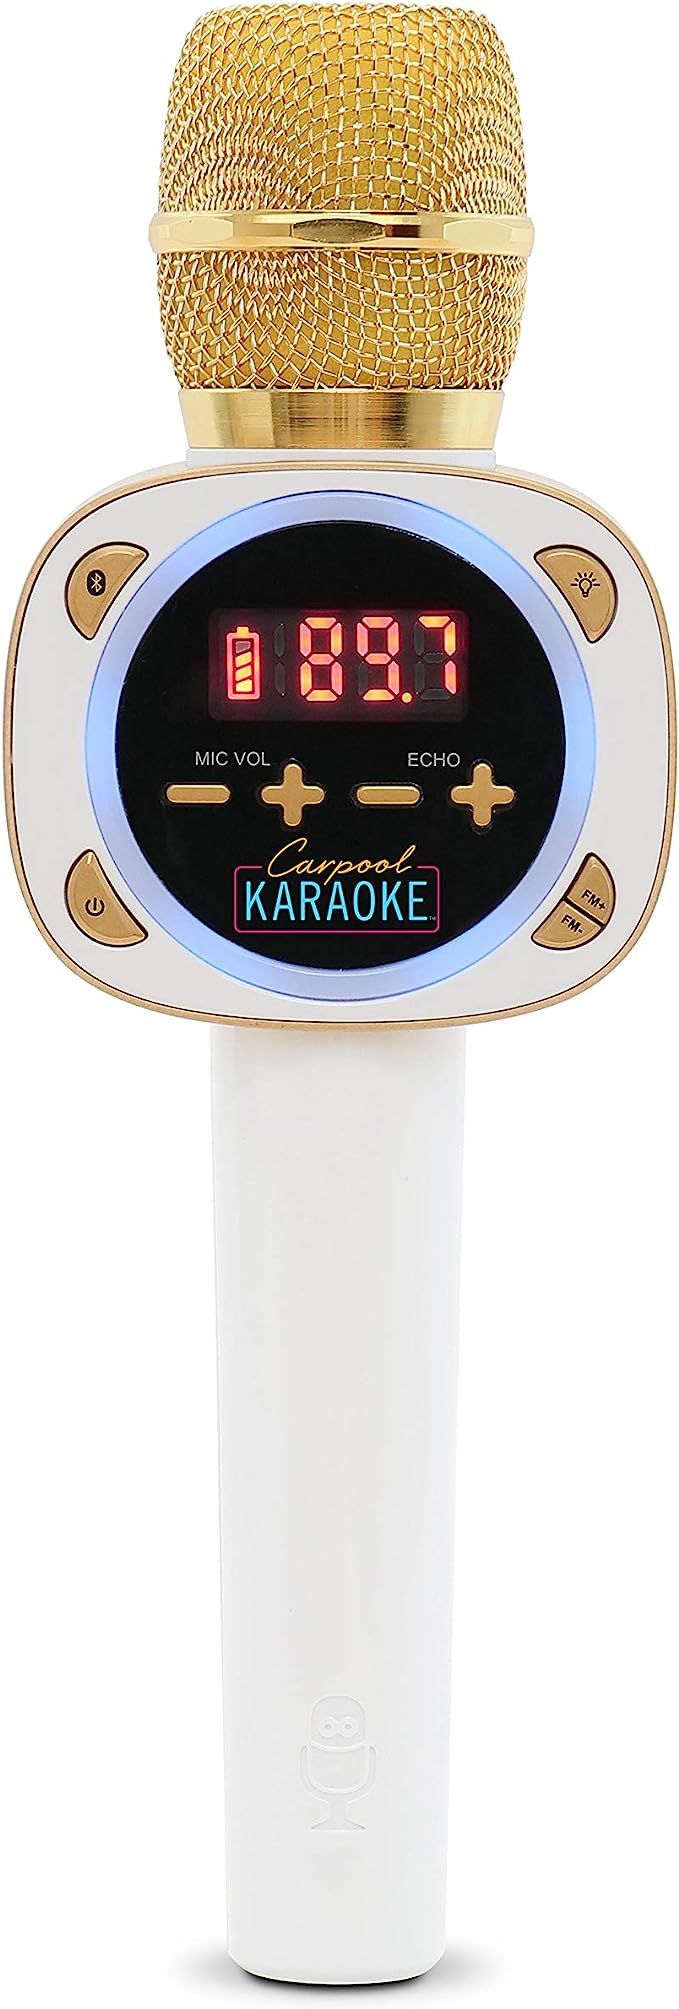 Singing Machine CPK545, Official Carpool Karaoke, The Mic, Bluetooth Microphone for Cars, White | Amazon (US)